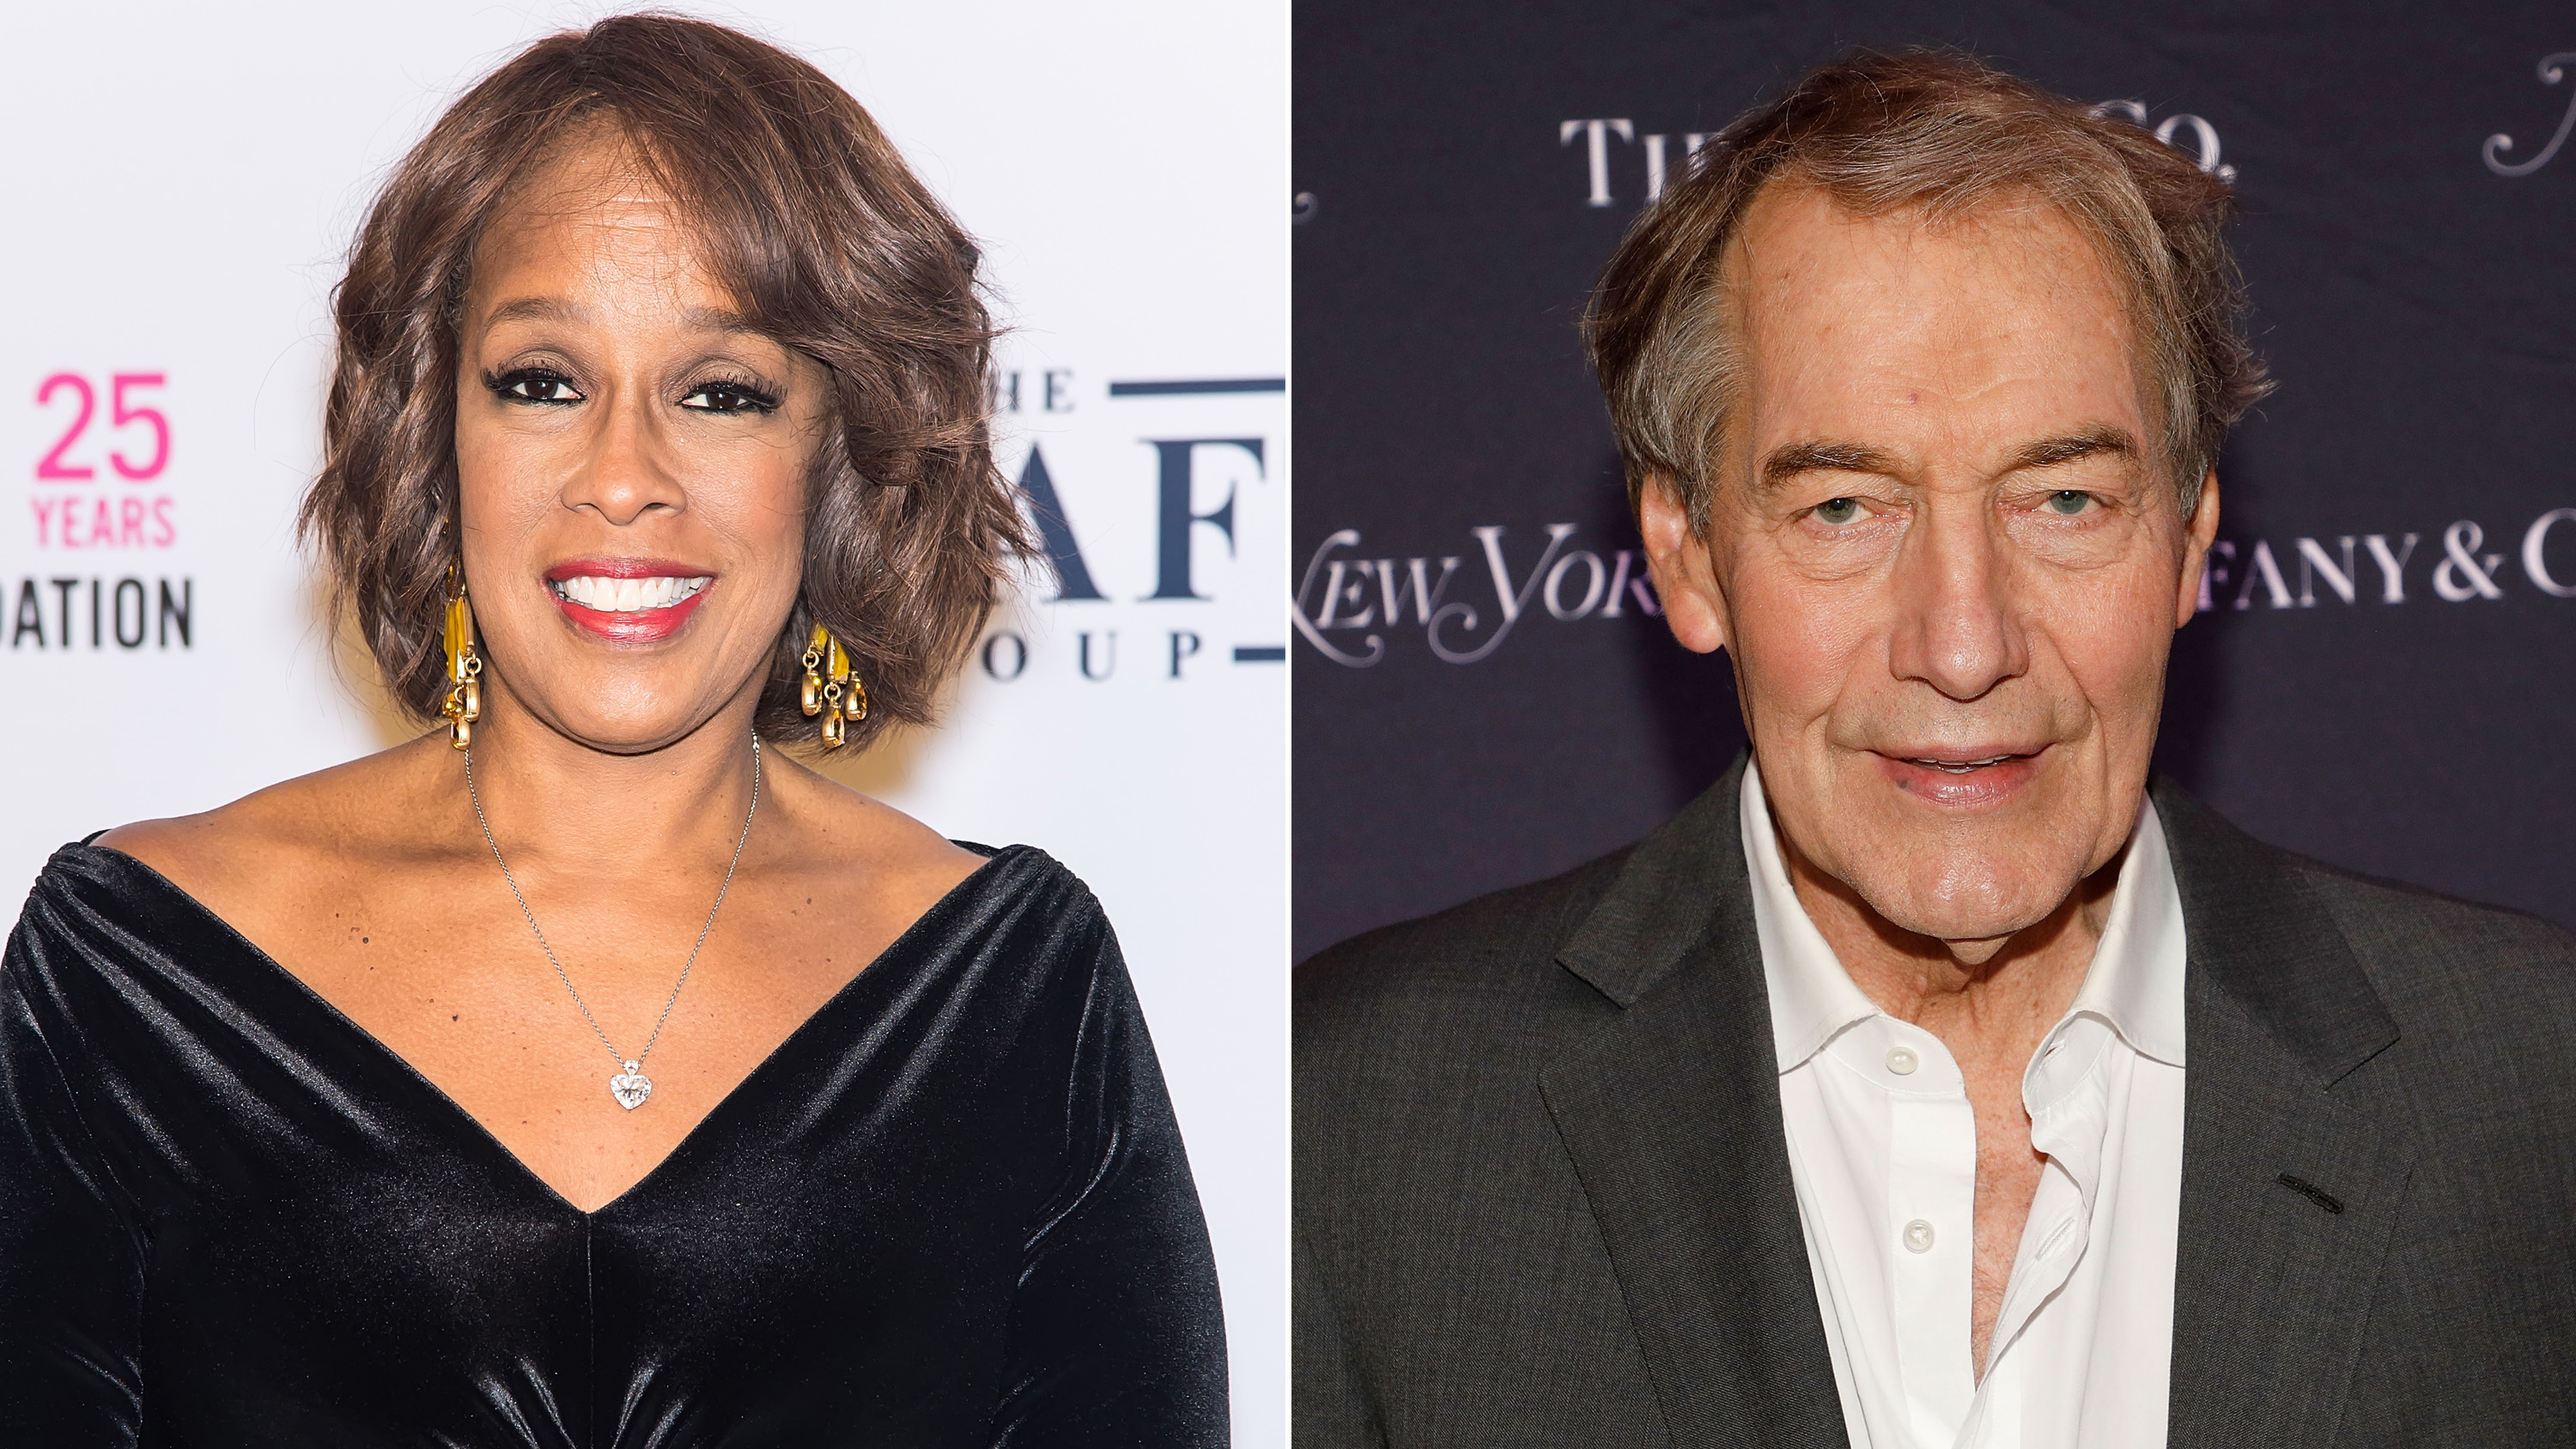 Gayle King (left) and Charlie Rose (right). (Gilbert Carrasquillo—FilmMagic/Getty Images; Taylor Hill—FilmMagic/Getty Images)